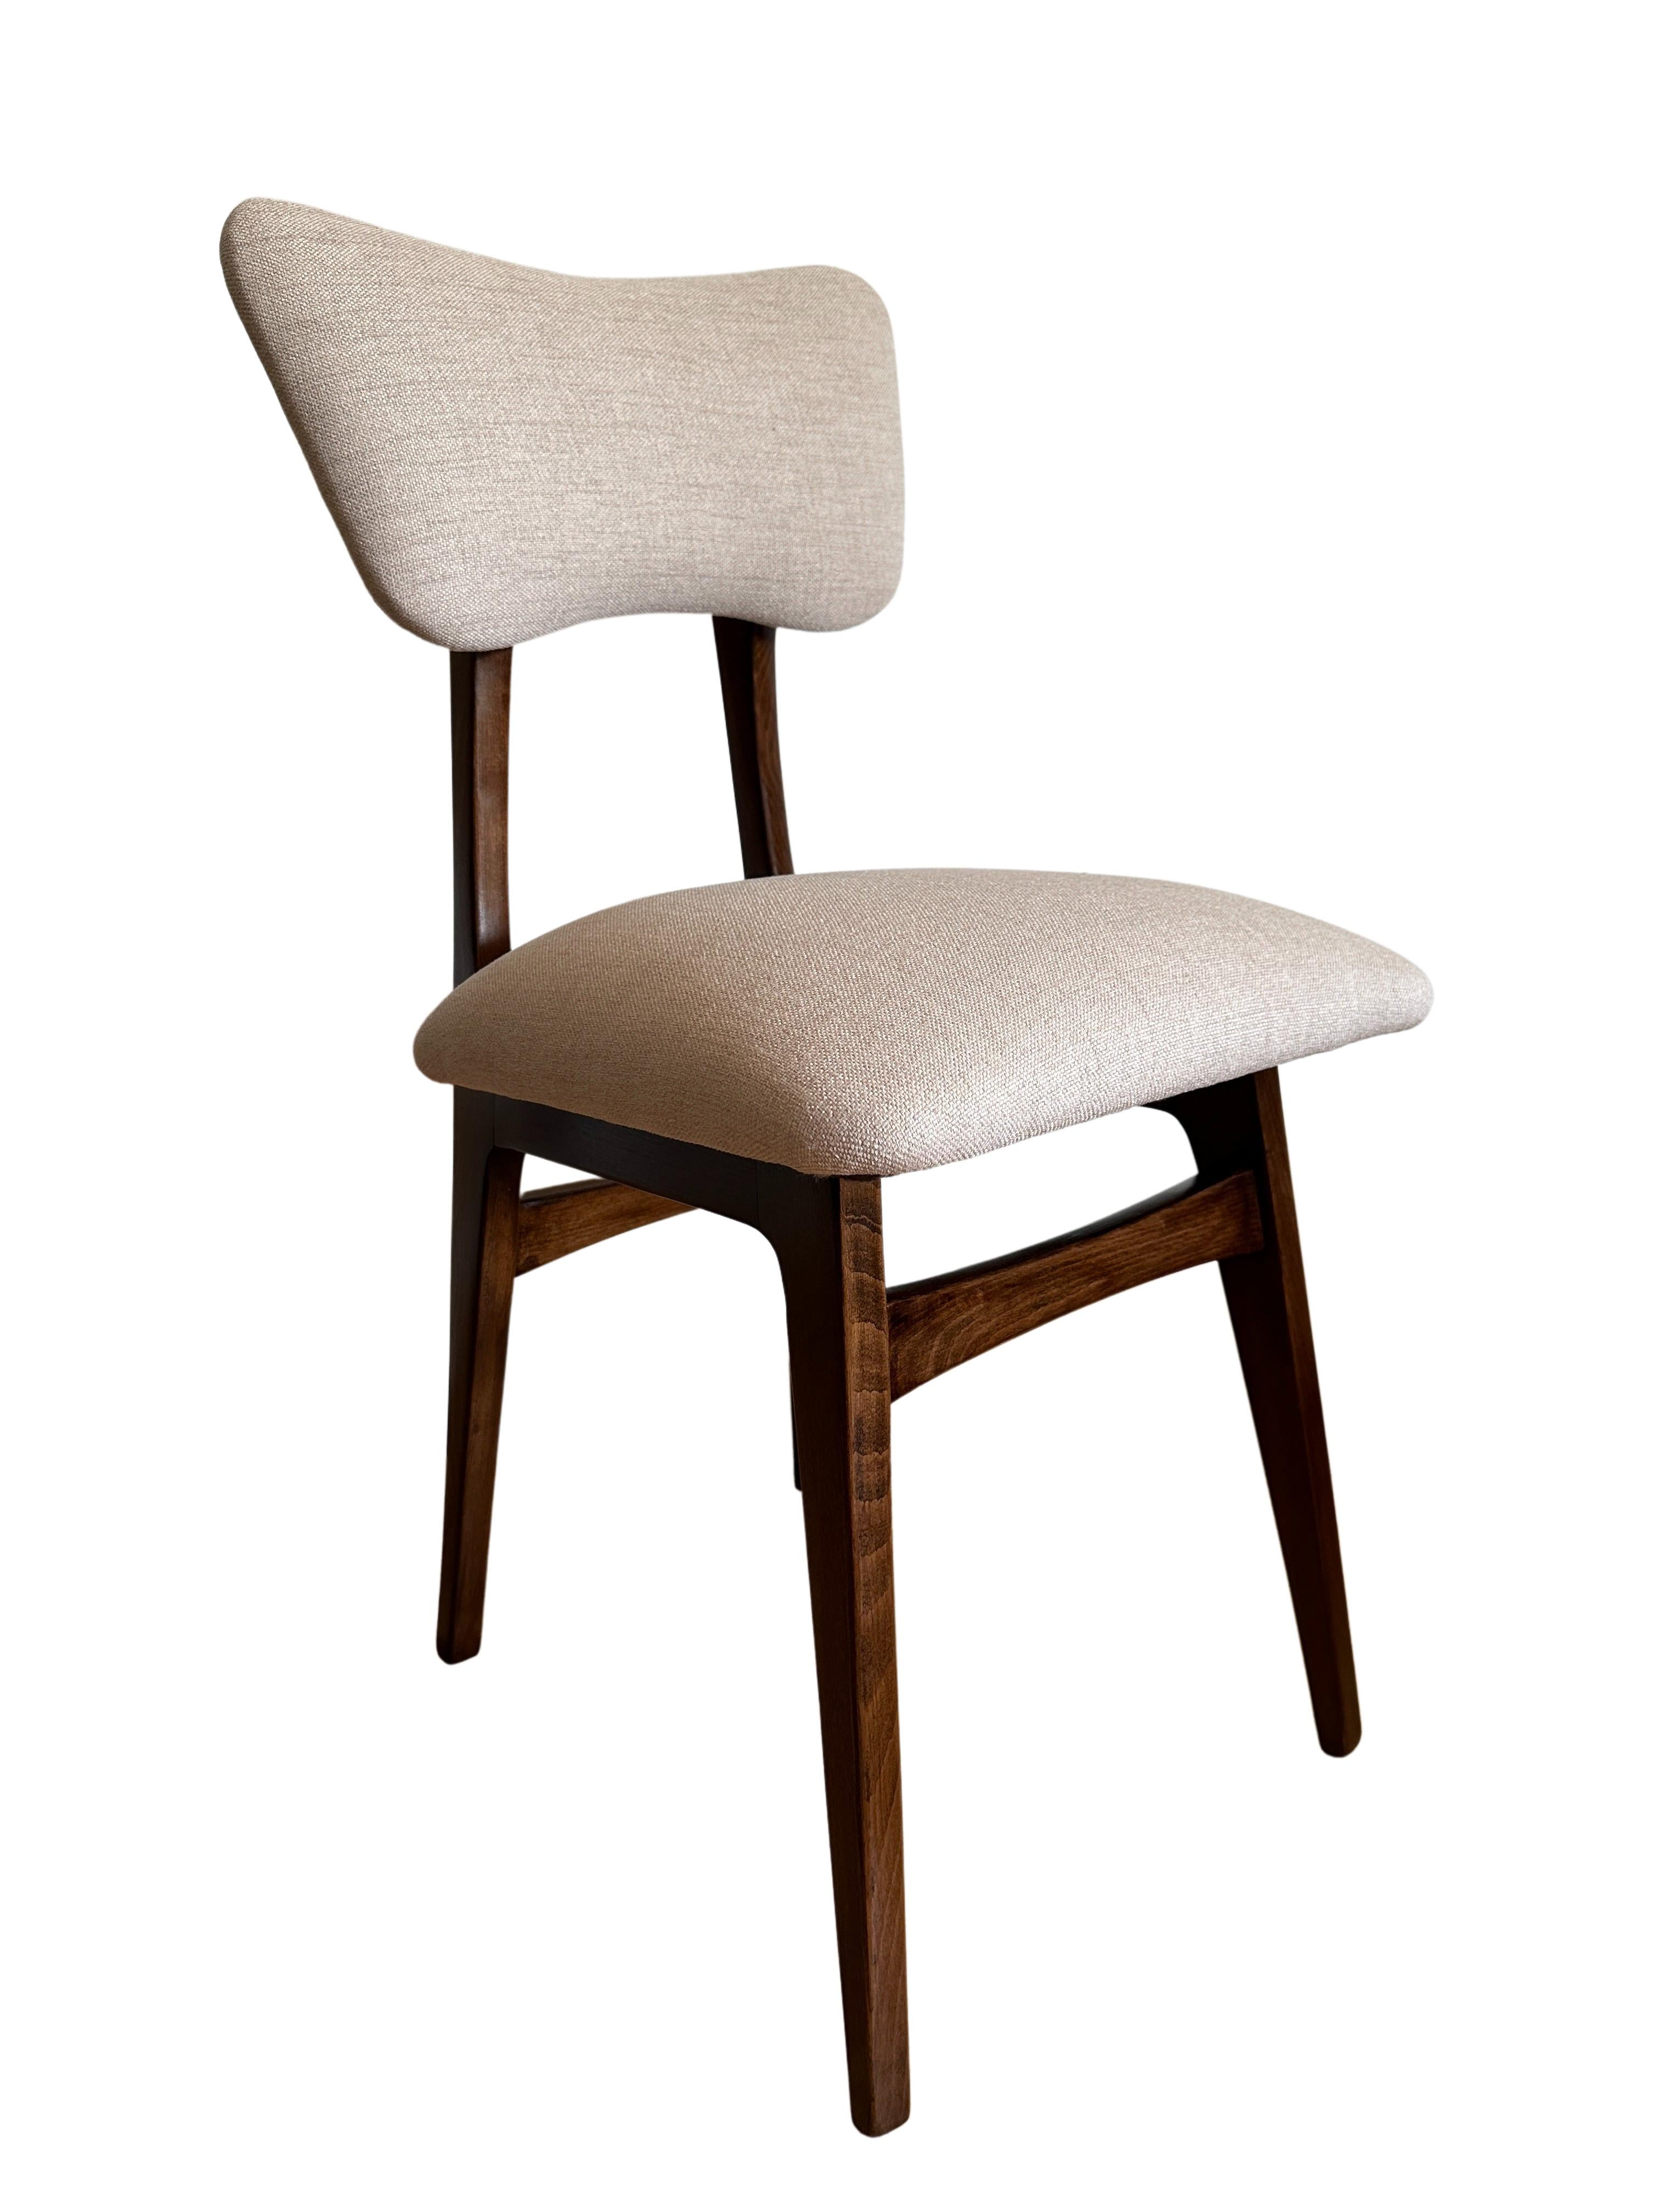 Set of 6 Midcentury Beige Dining Chairs, Europe, 1960s For Sale 2